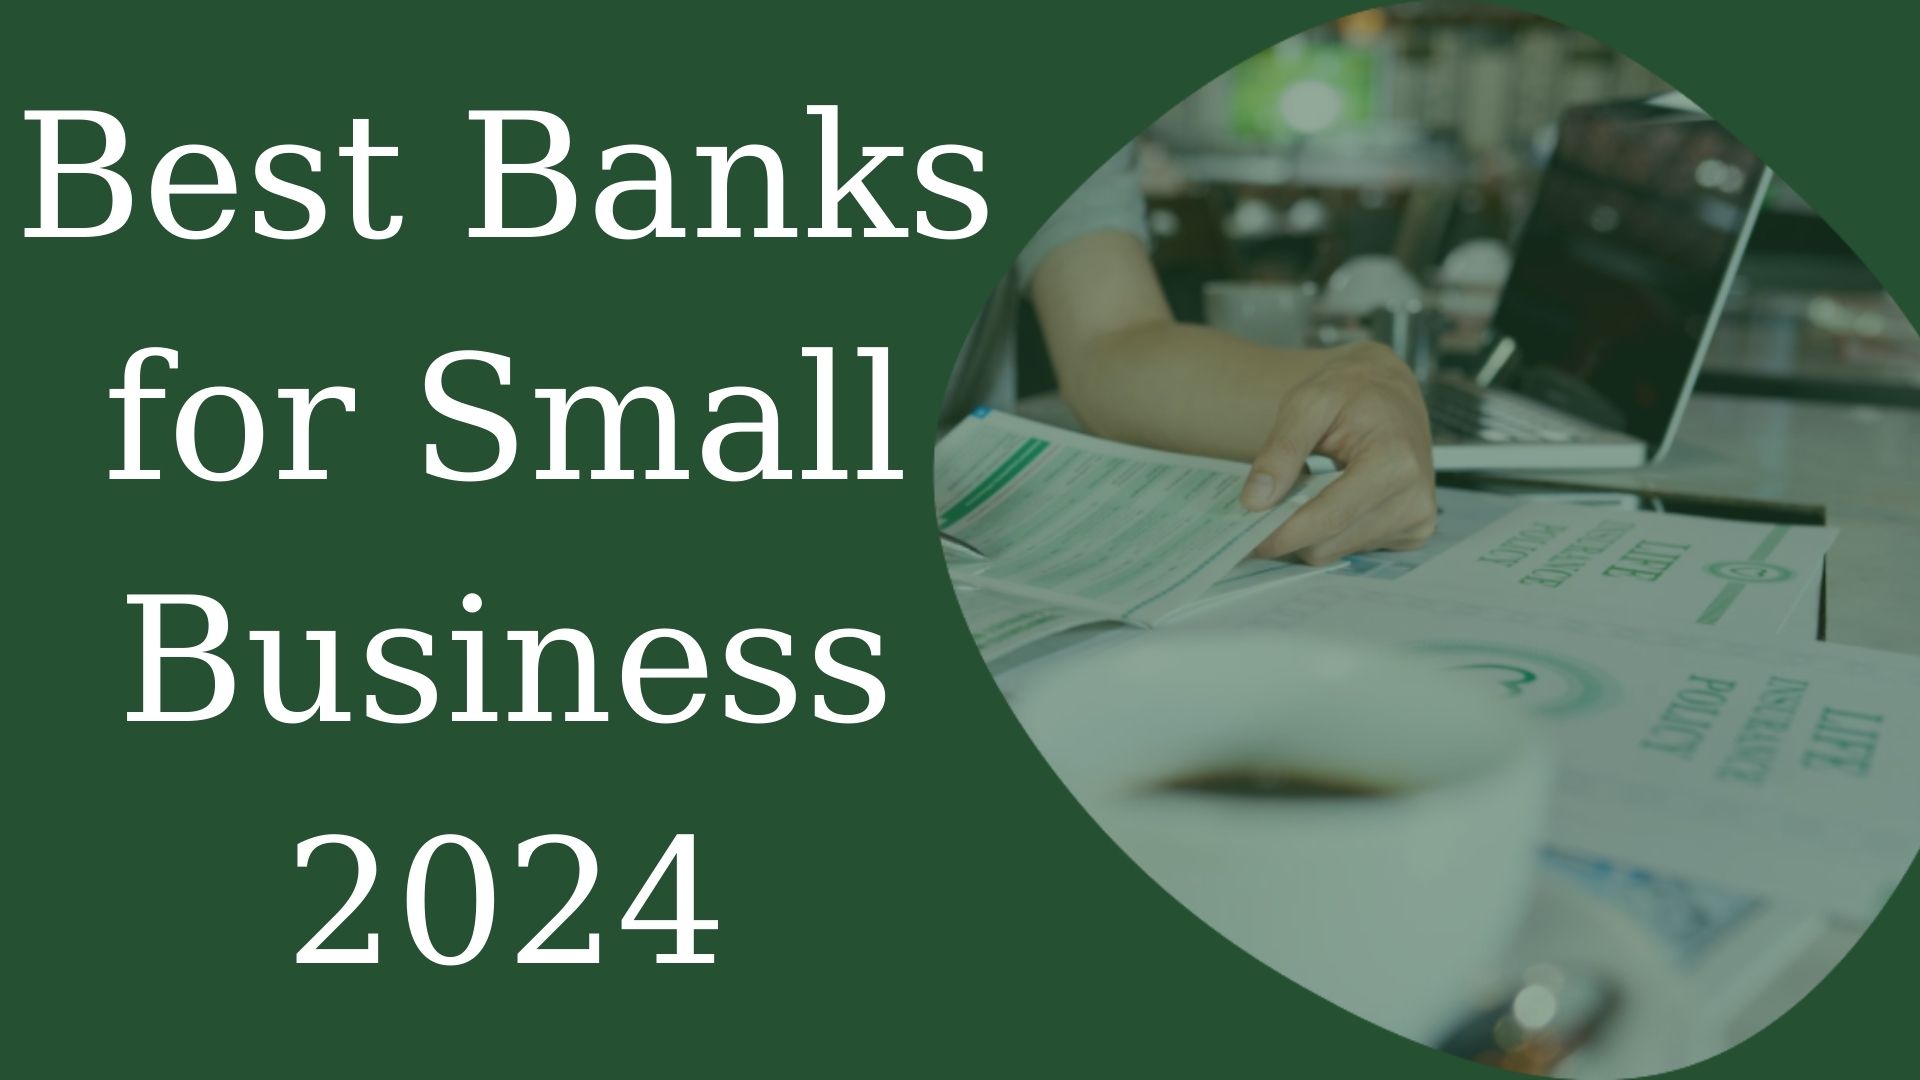 Best Banks for Small Business